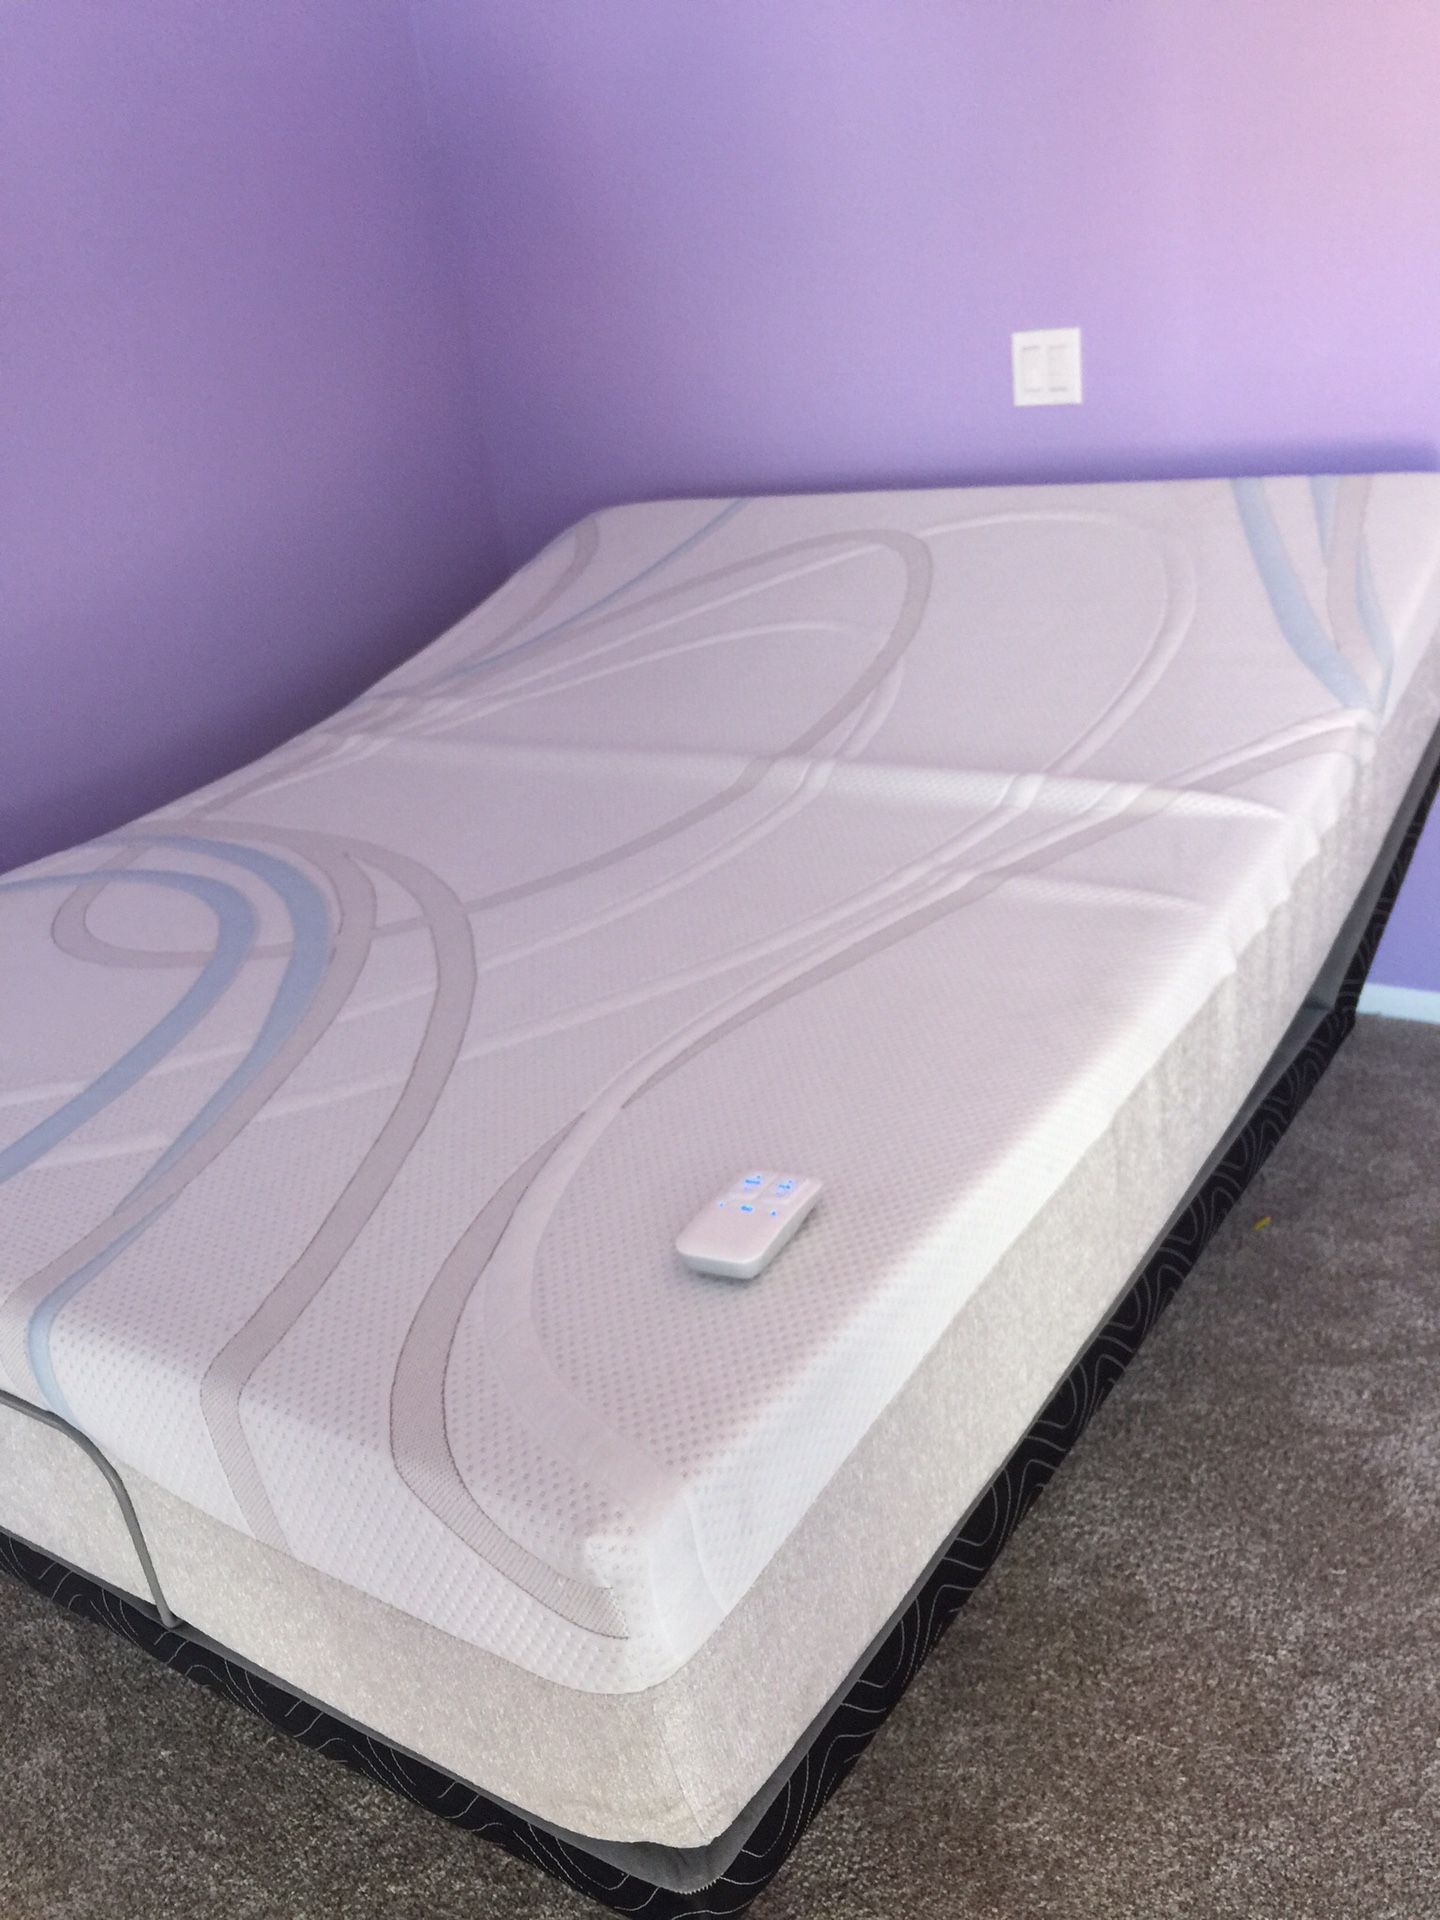 Queen adjustable bed with cool gel memory foam mattress $400 can deliver